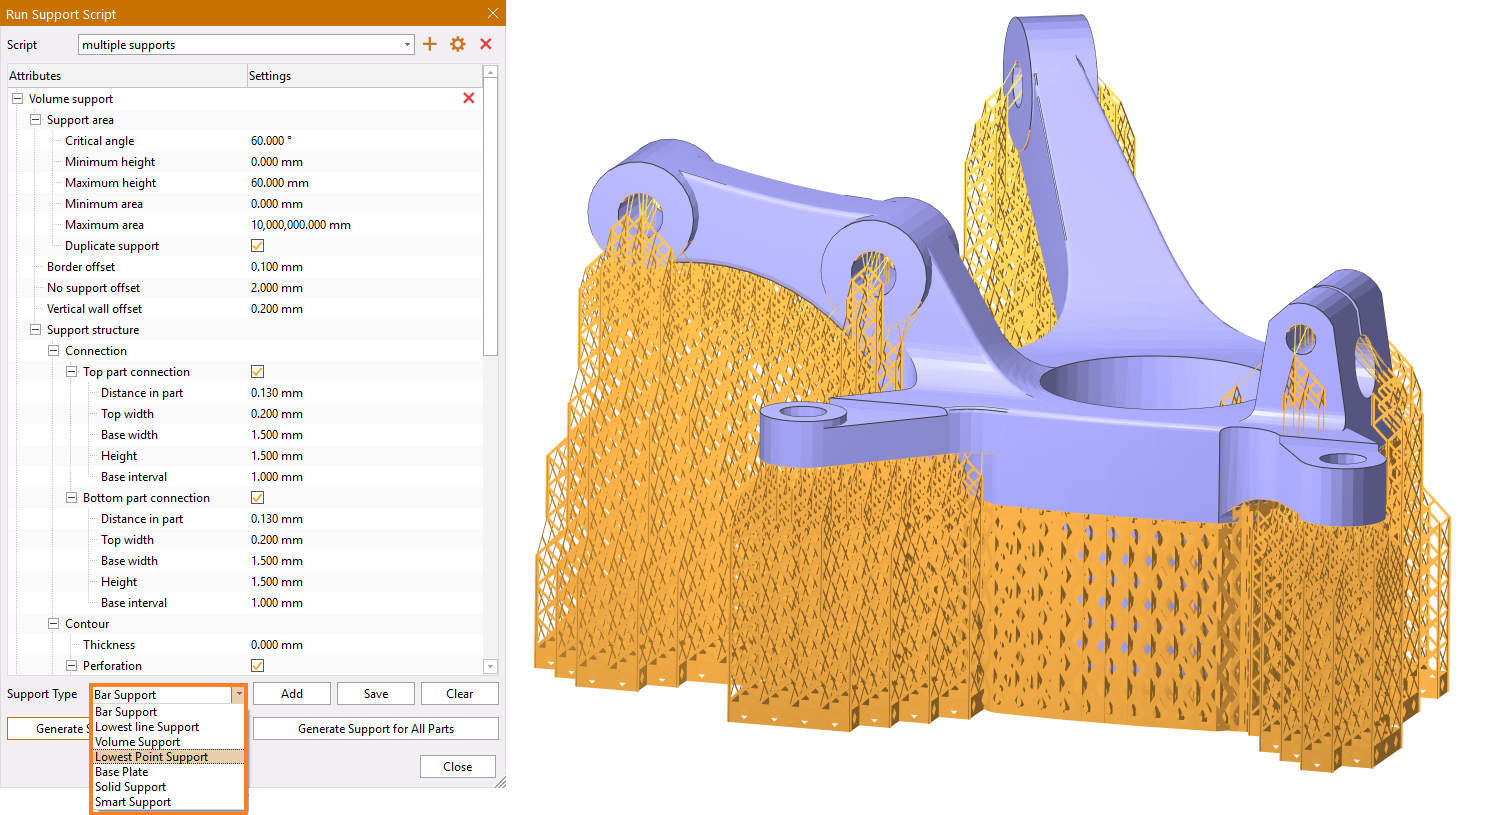 The SLM support module now contains new support types and parameters. Image via VoxelDance.